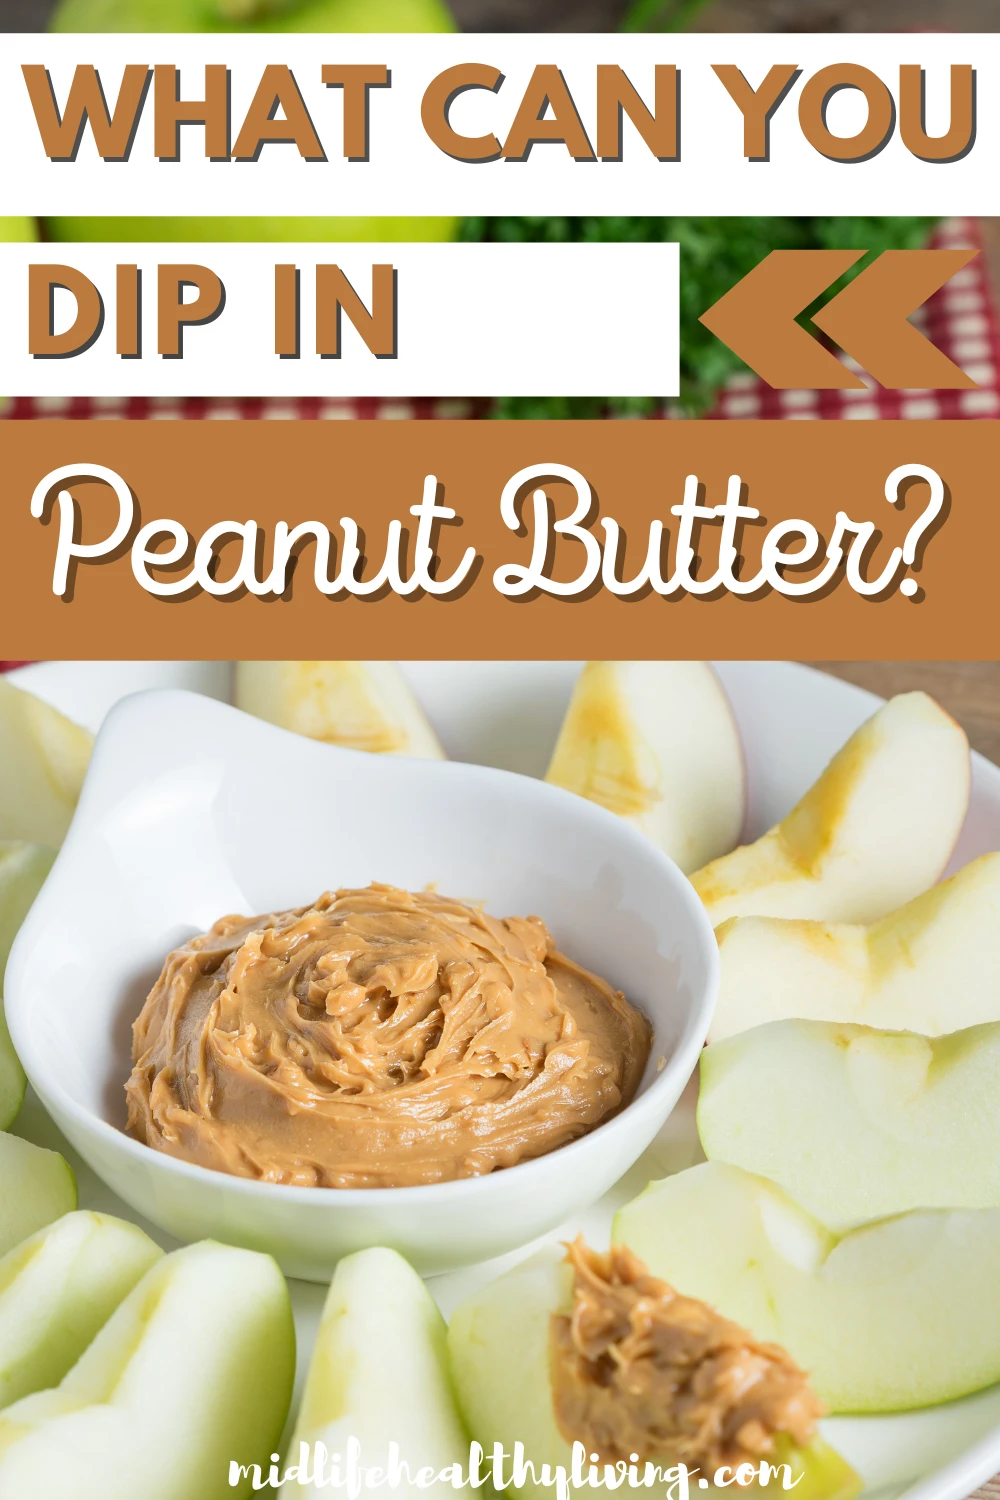 Homemade Peanut Butter - All the Healthy Things